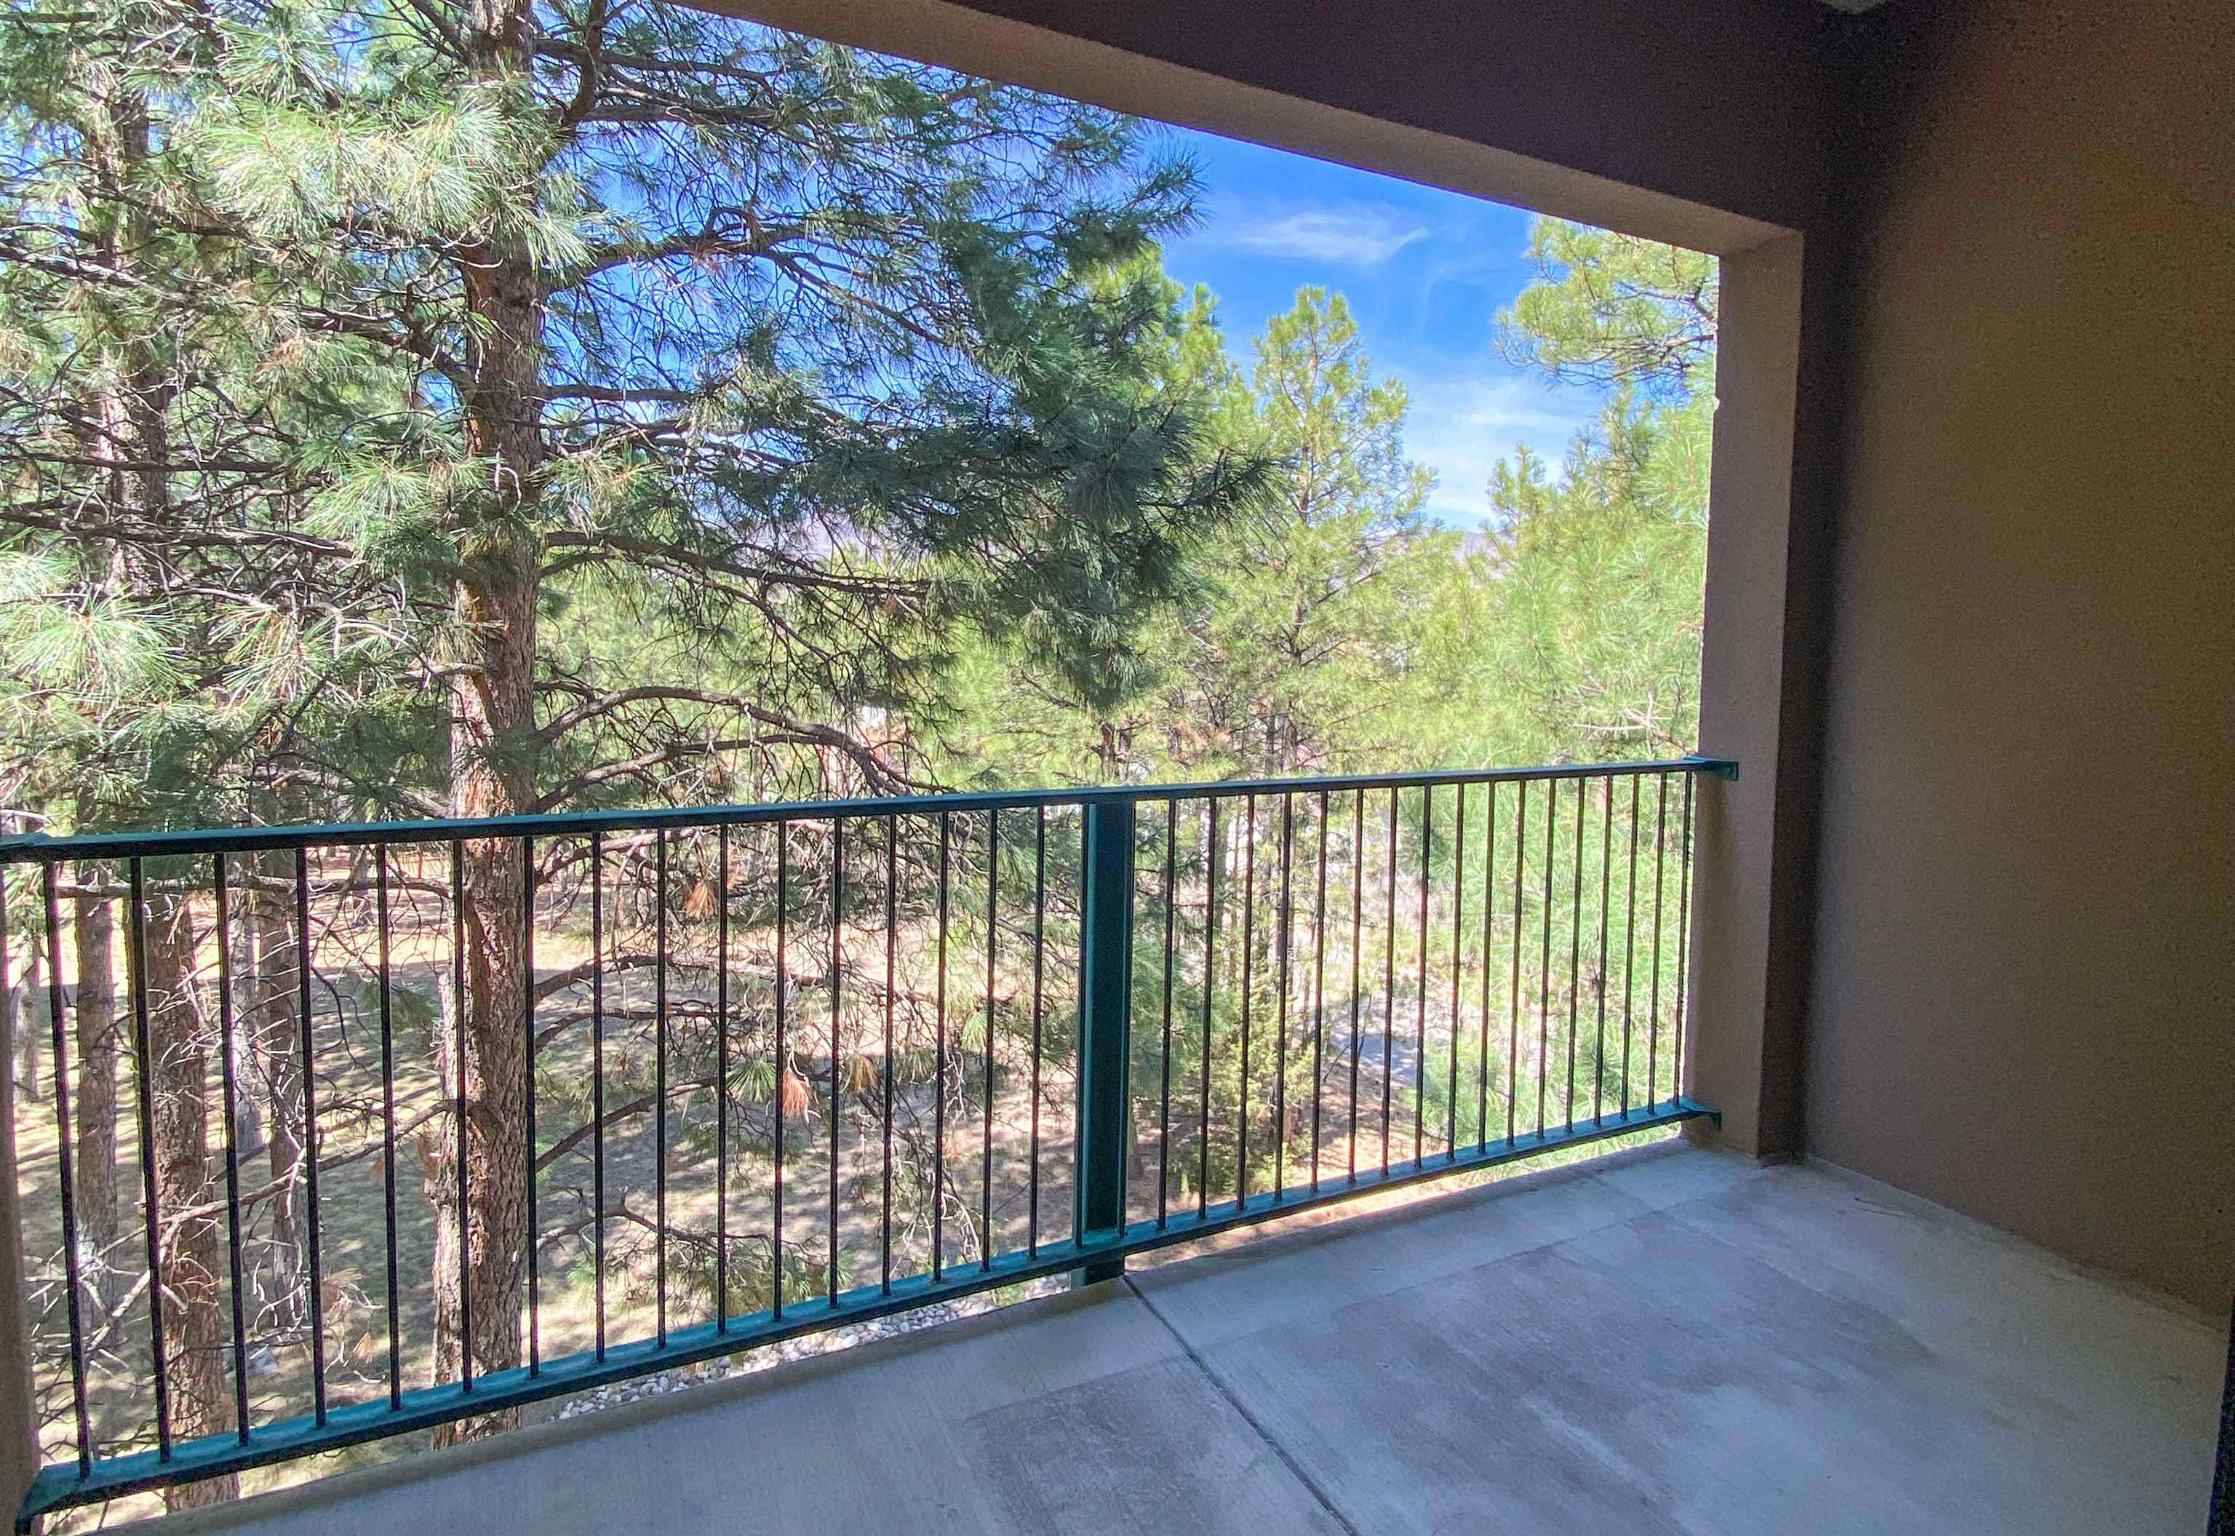 1001 Oppenheimer 220, Los Alamos, New Mexico 87544, 2 Bedrooms Bedrooms, ,2 BathroomsBathrooms,Residential,For Sale,1001 Oppenheimer 220,202201218